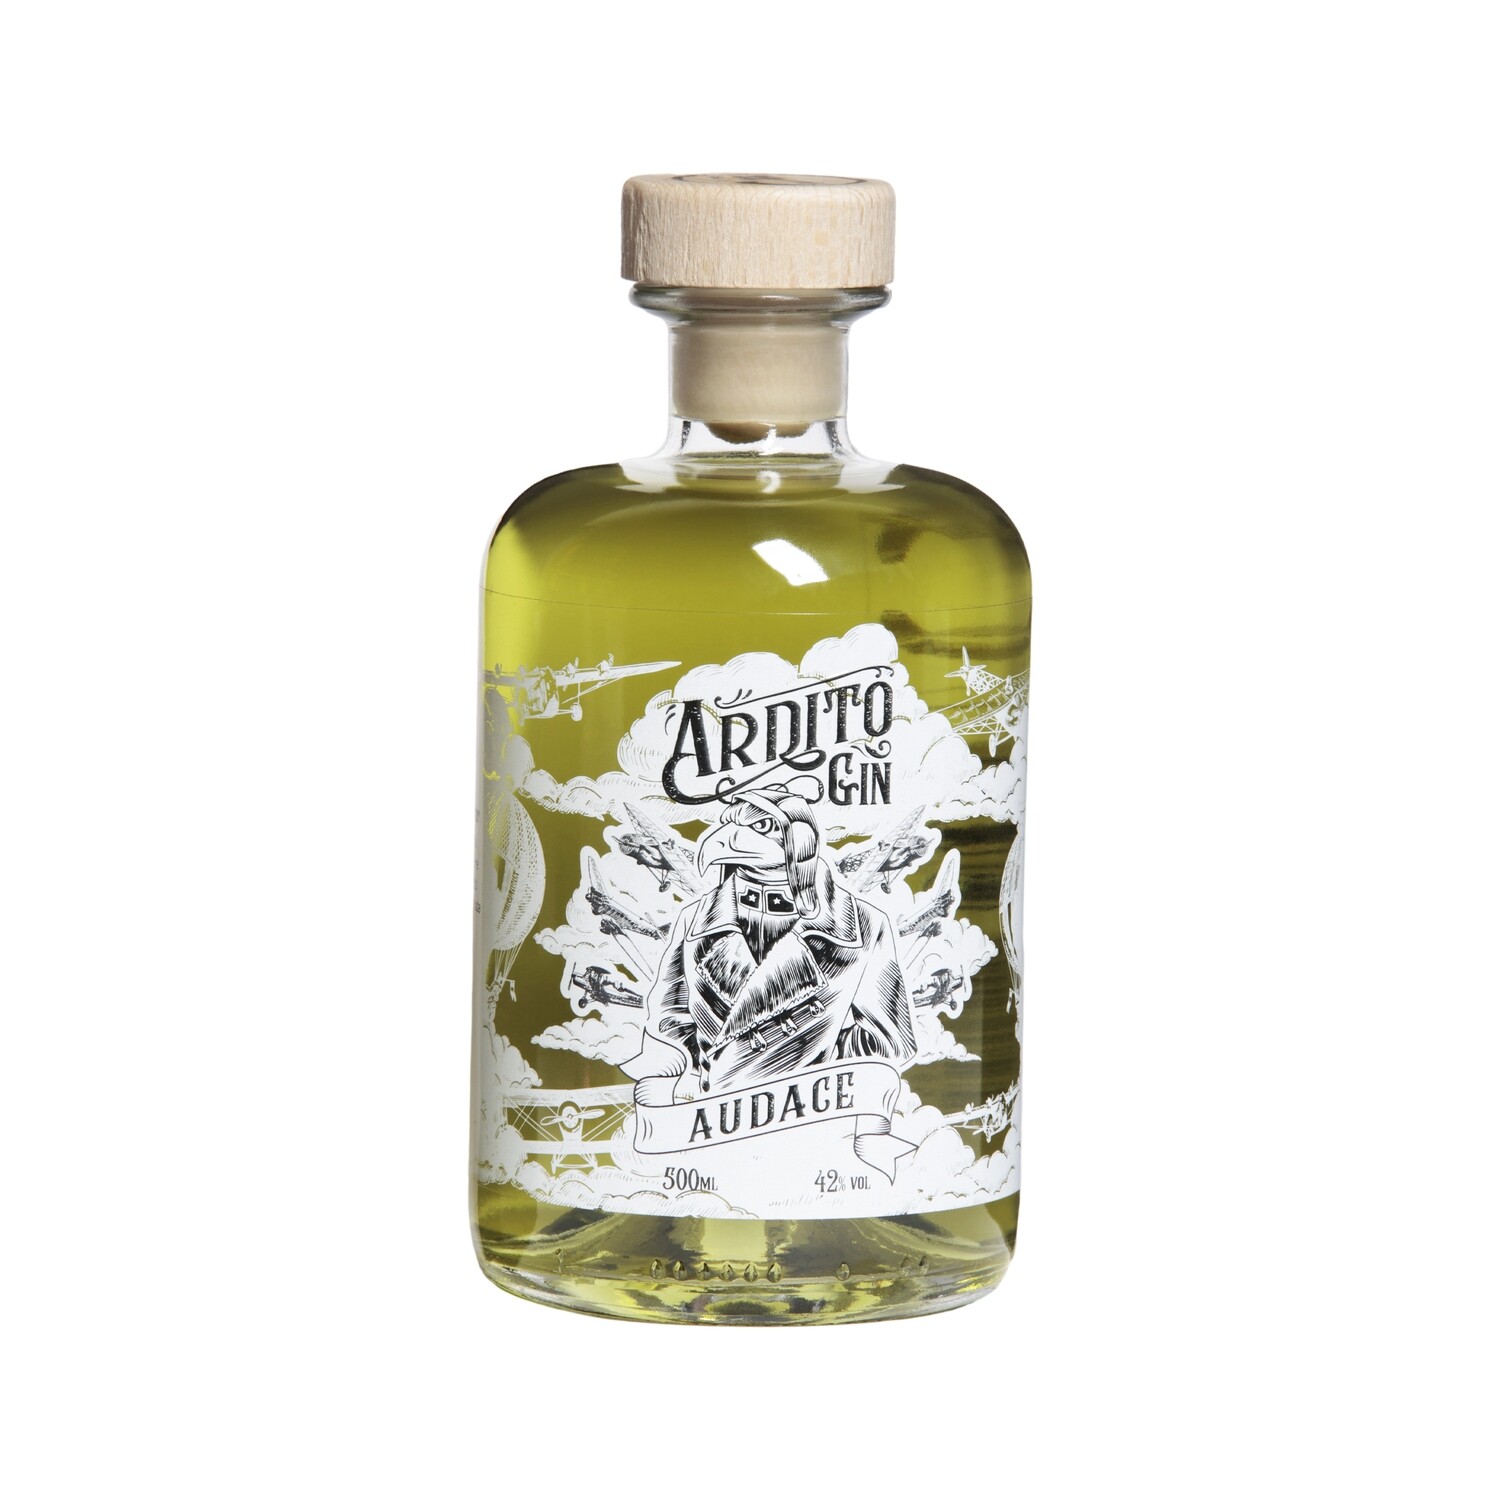 DRY GIN "AUDACE"